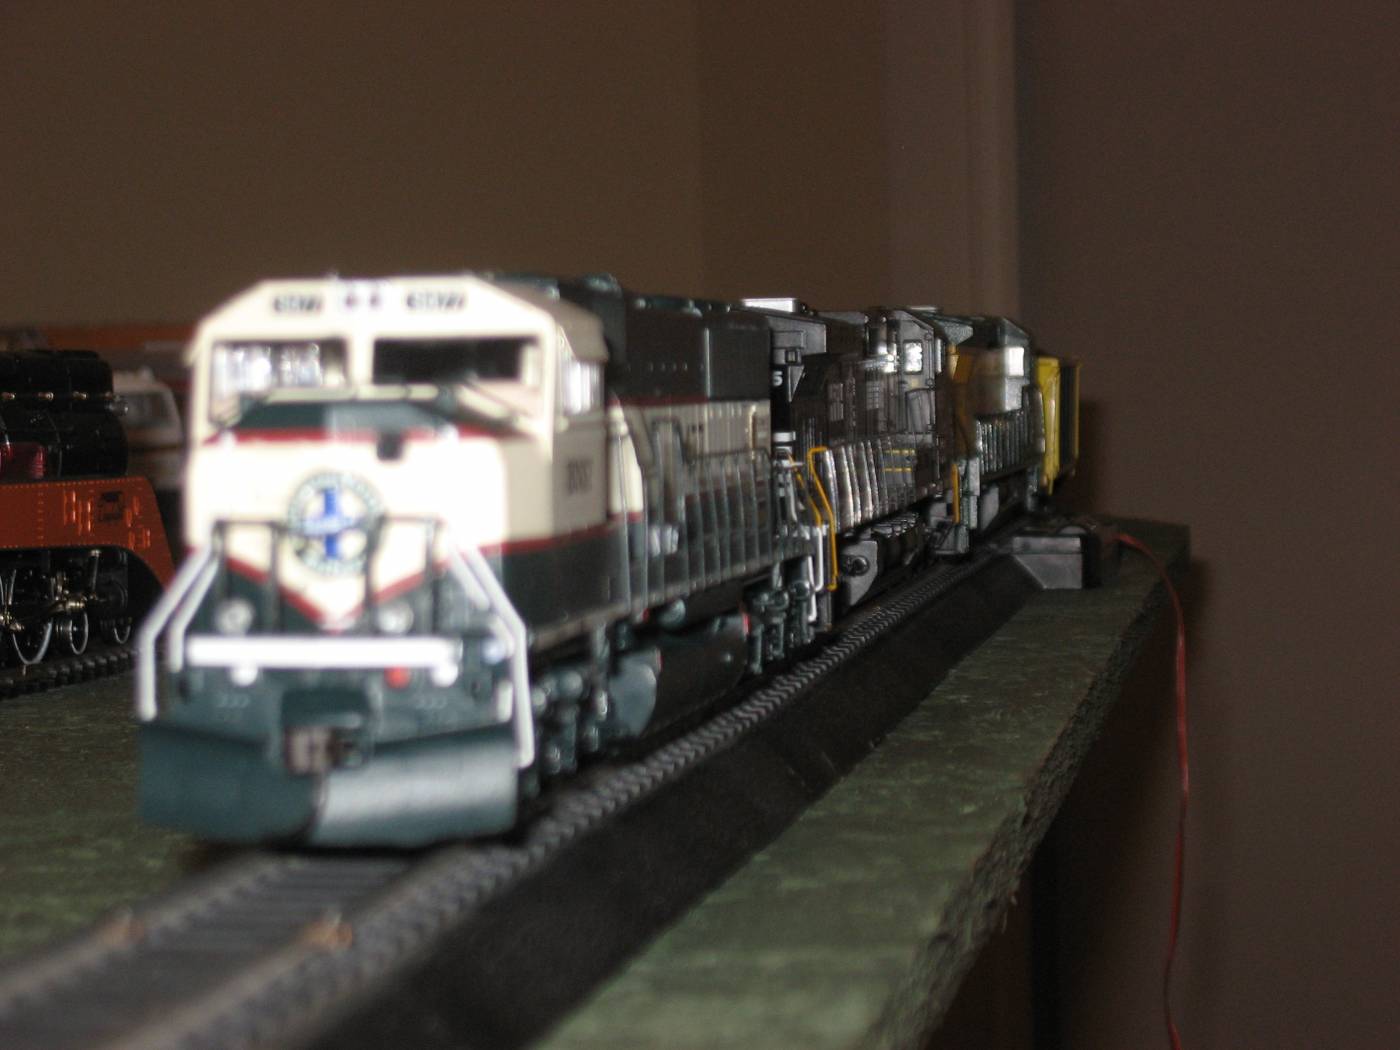 3 six-axle engines on a freight